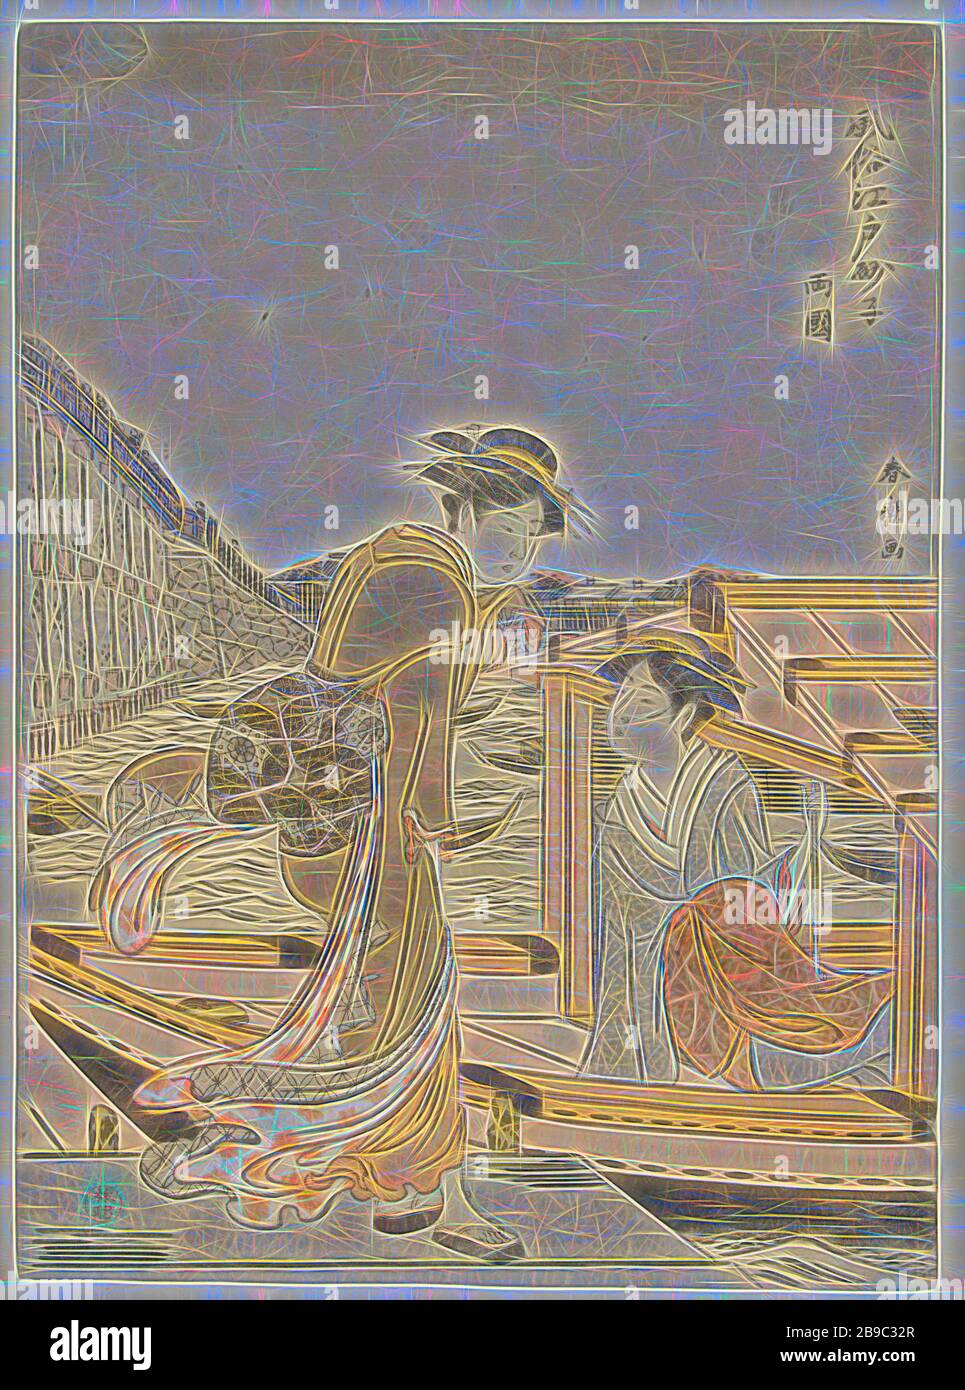 At the Ryogoku bridge Ryogoku (title on object) Fuzoku Edo sunago (series title on object), Young woman on jetty at the Roygoku bridge, talking with woman with pipe in left hand, sitting in boat, in the background boats on the river Sumida., Katsukawa Shuncho (mentioned on object), Japan, 1783 - 1787, paper, colour woodcut, h 261 mm × w 190 mm, Reimagined by Gibon, design of warm cheerful glowing of brightness and light rays radiance. Classic art reinvented with a modern twist. Photography inspired by futurism, embracing dynamic energy of modern technology, movement, speed and revolutionize cu Stock Photo